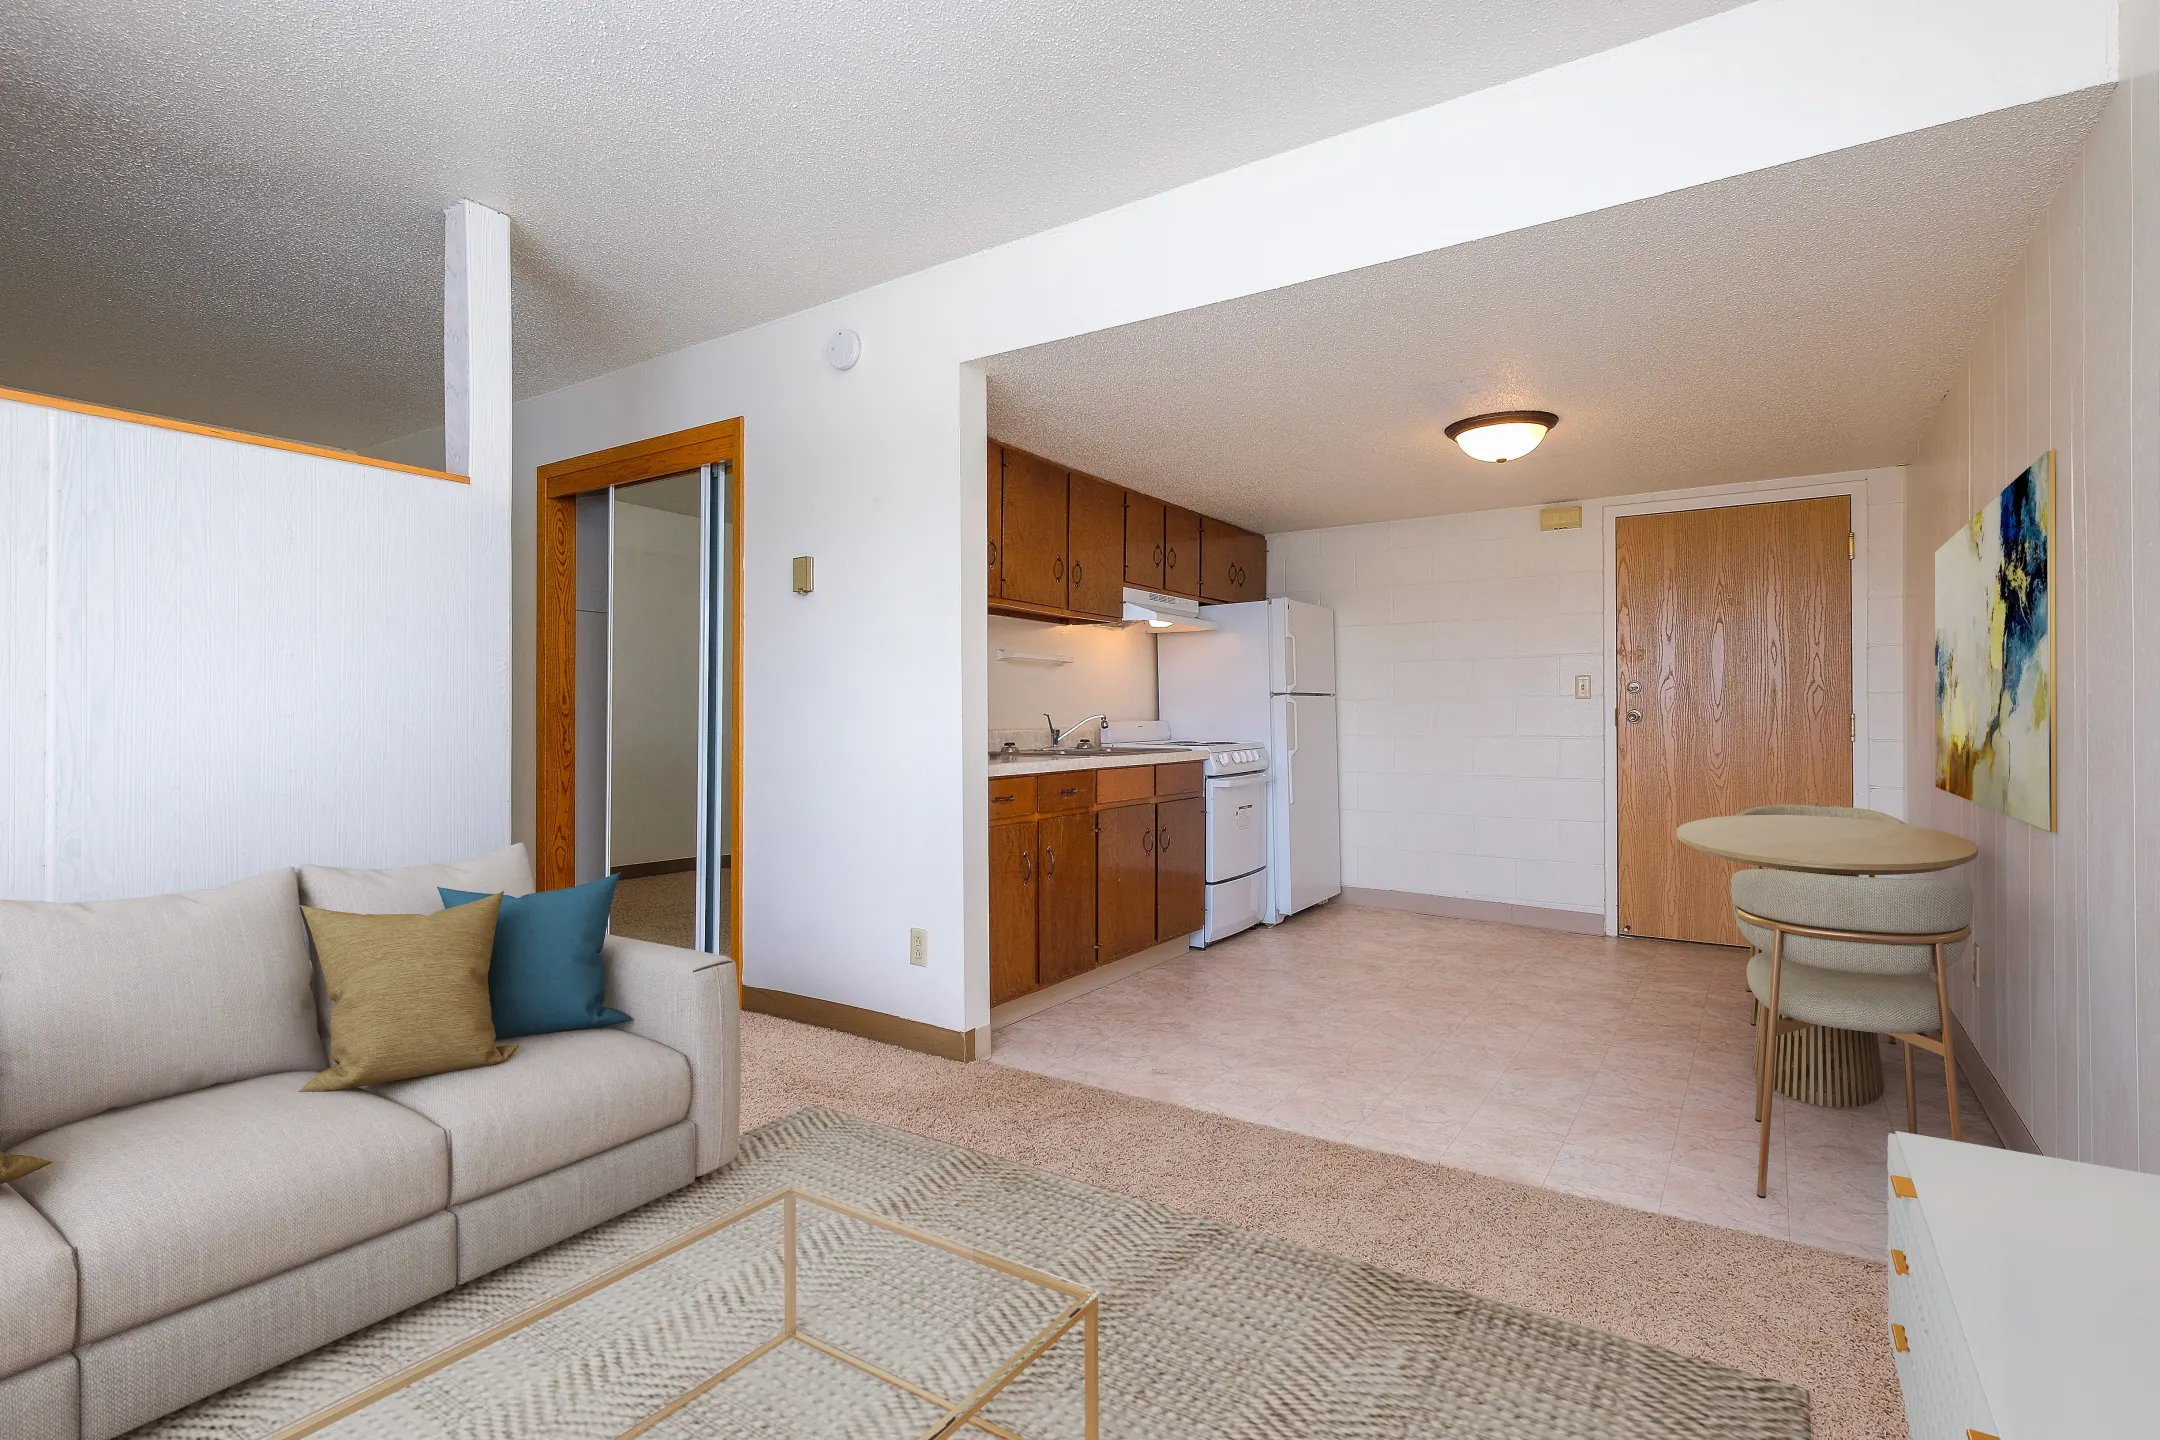 Living Room - Luxford Court Apartment Community - Fargo, ND